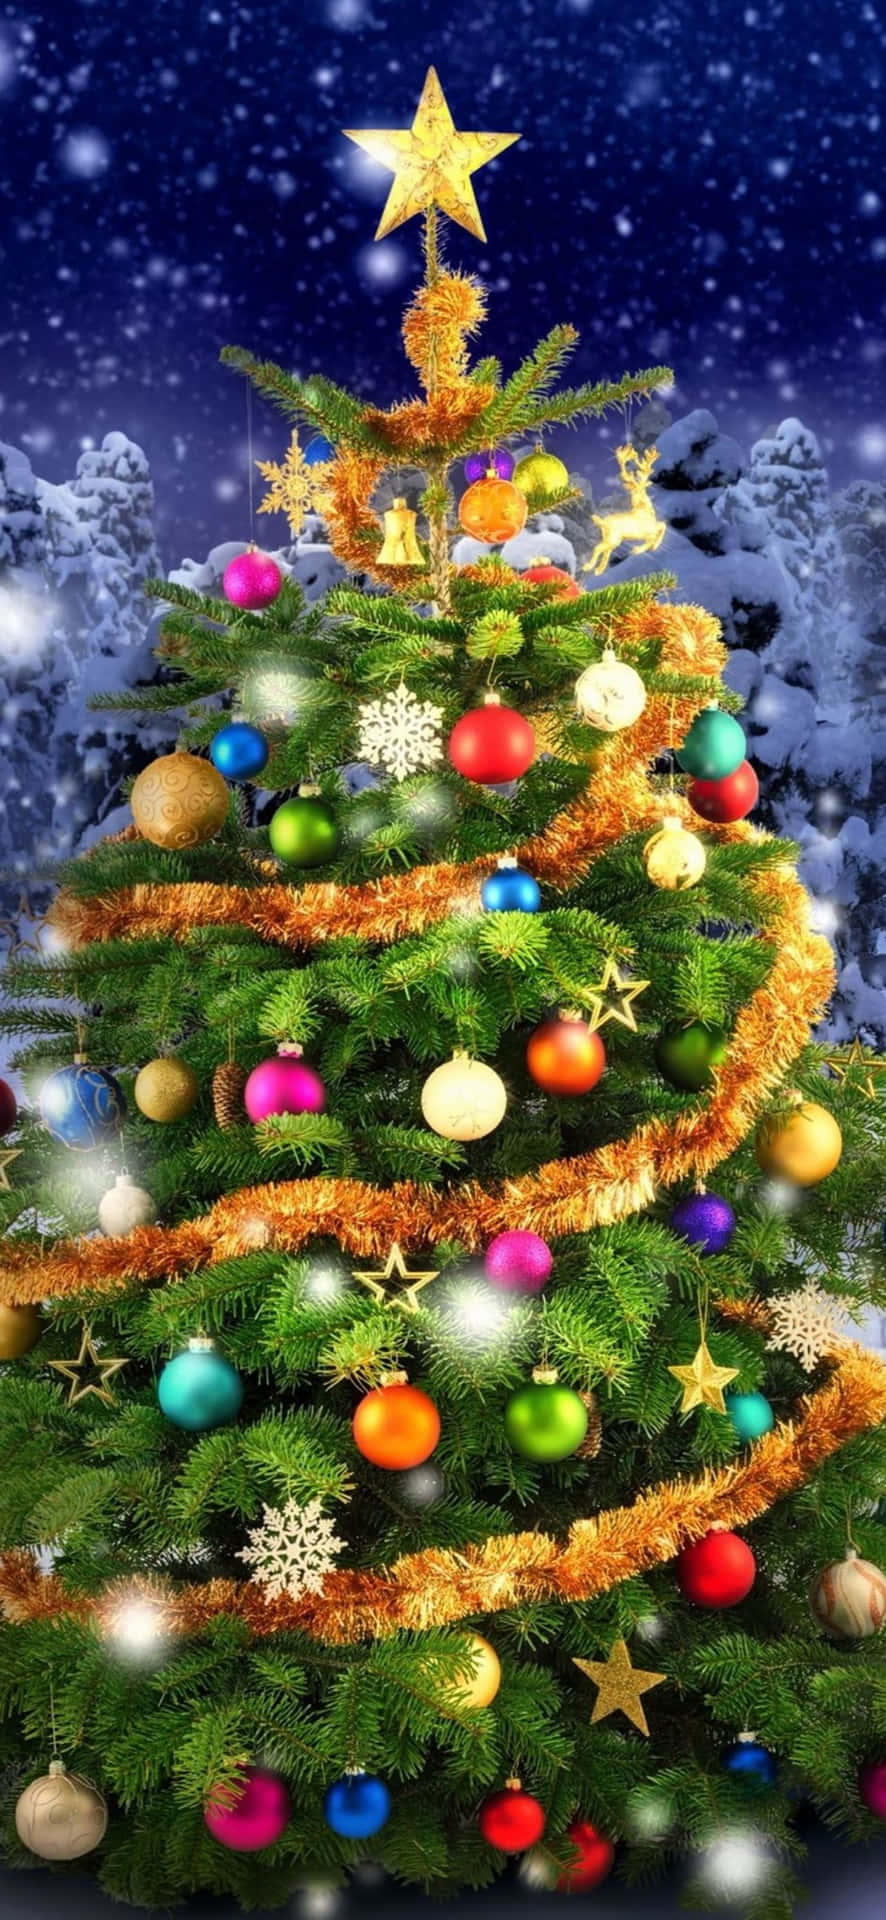 Christmas Iphone Background Wallpaper